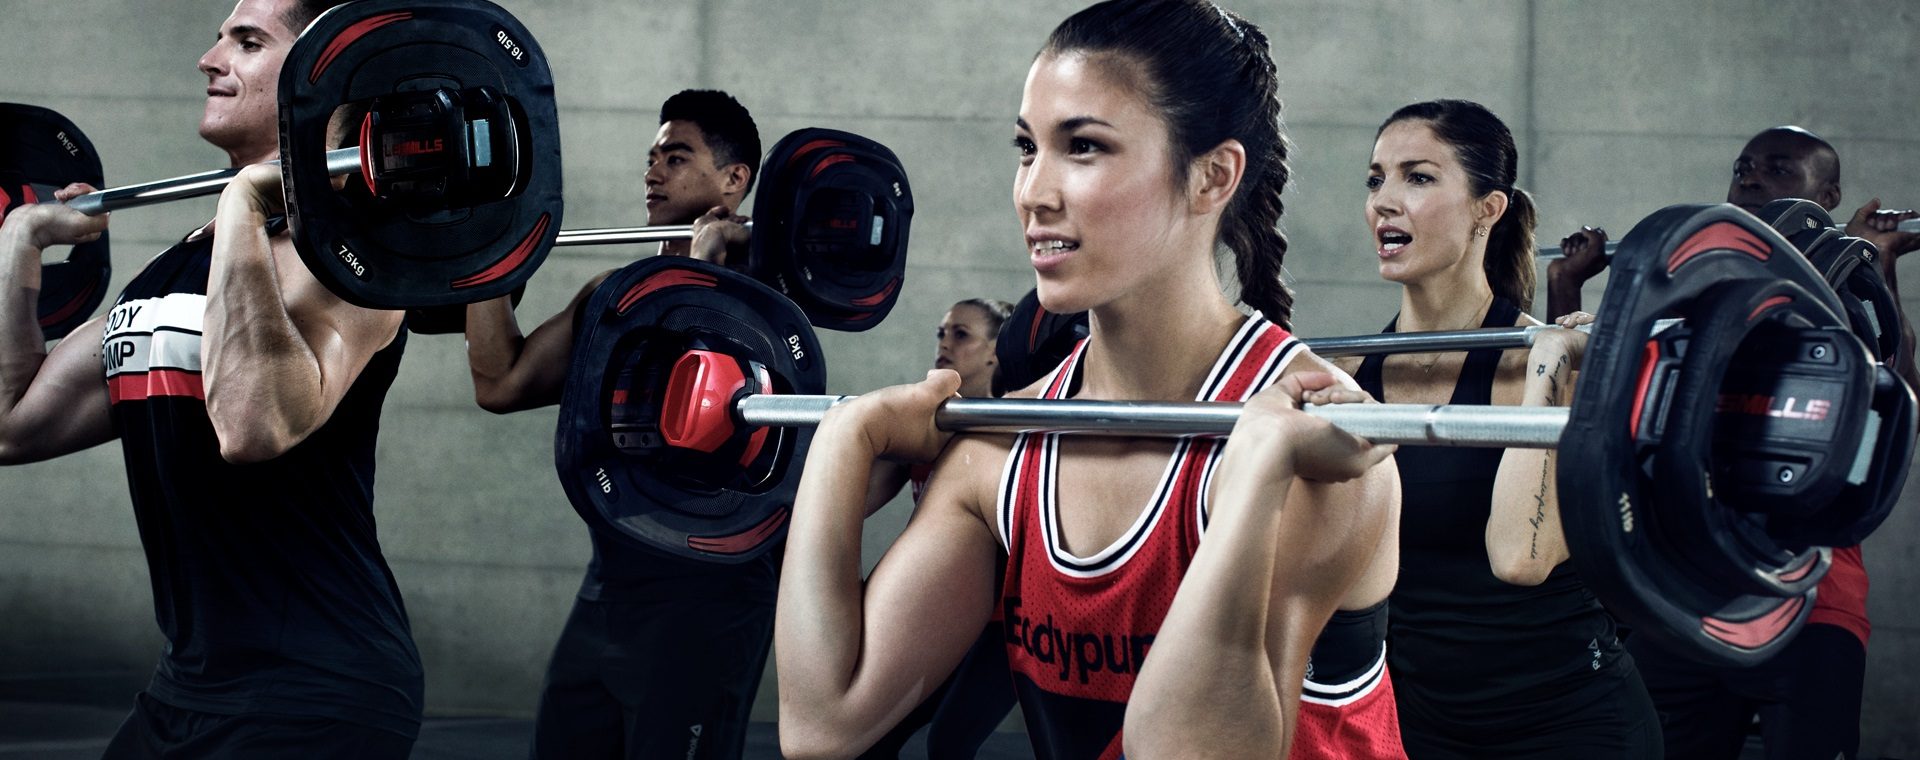 Group Fitness for athletes | The GoodLife Fitness Blog